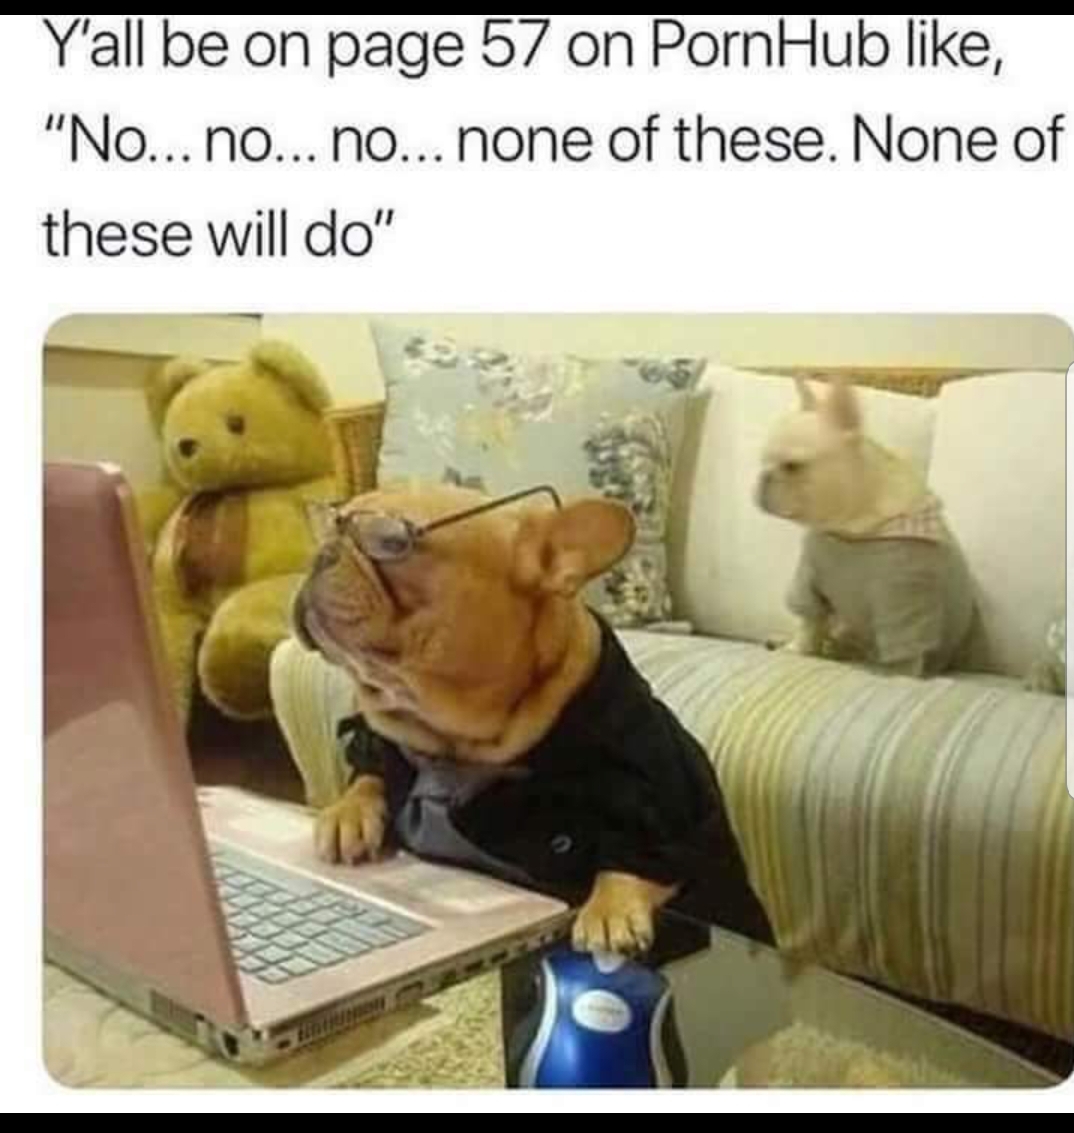 meme - no no no none of these will do meme - Y'all be on page 57 on PornHub , "No... no... no... none of these. None of these will do"